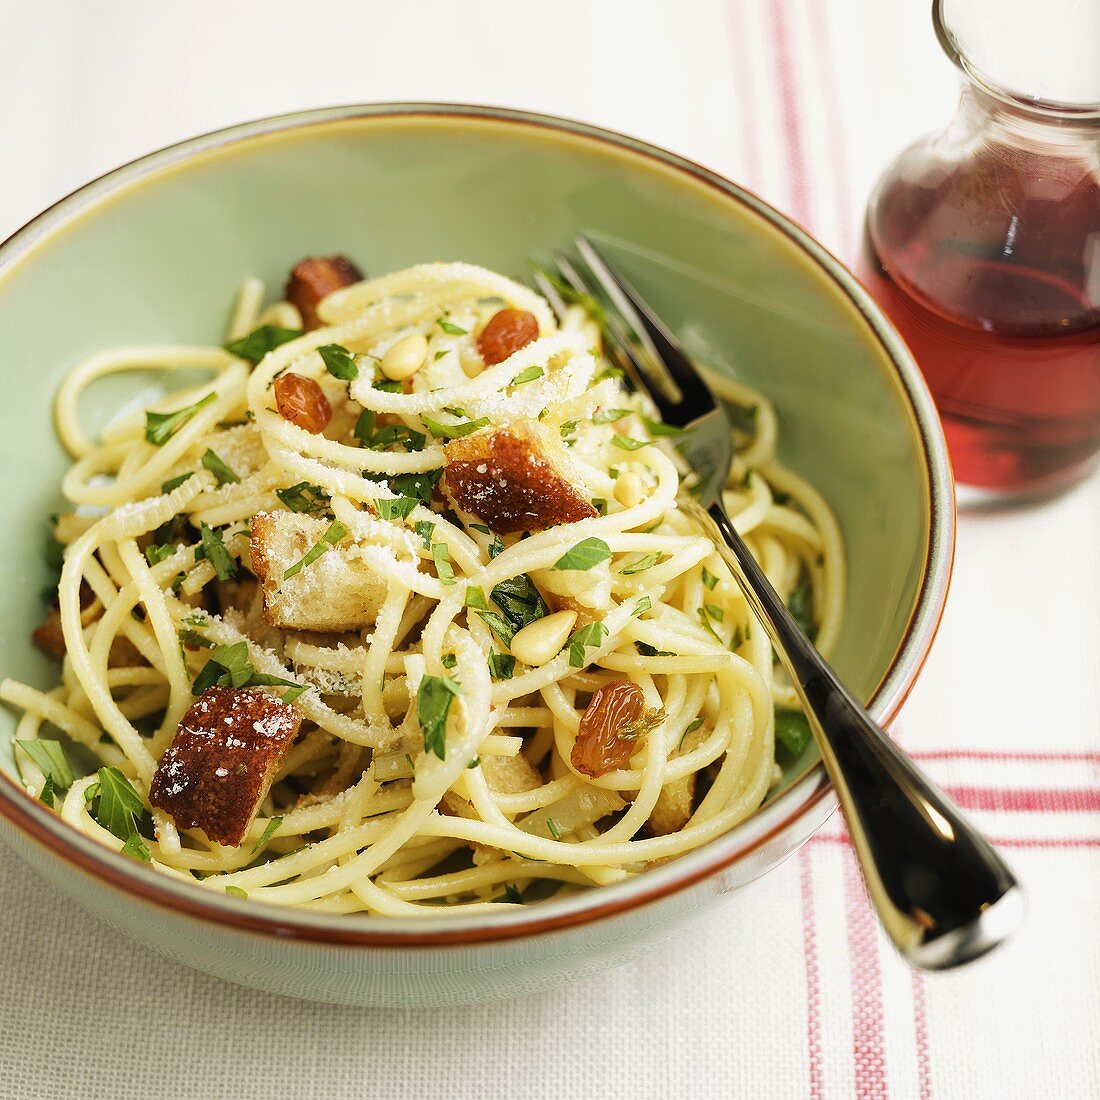 Spaghetti with Raisins and Pine Nuts in a Green Bowl